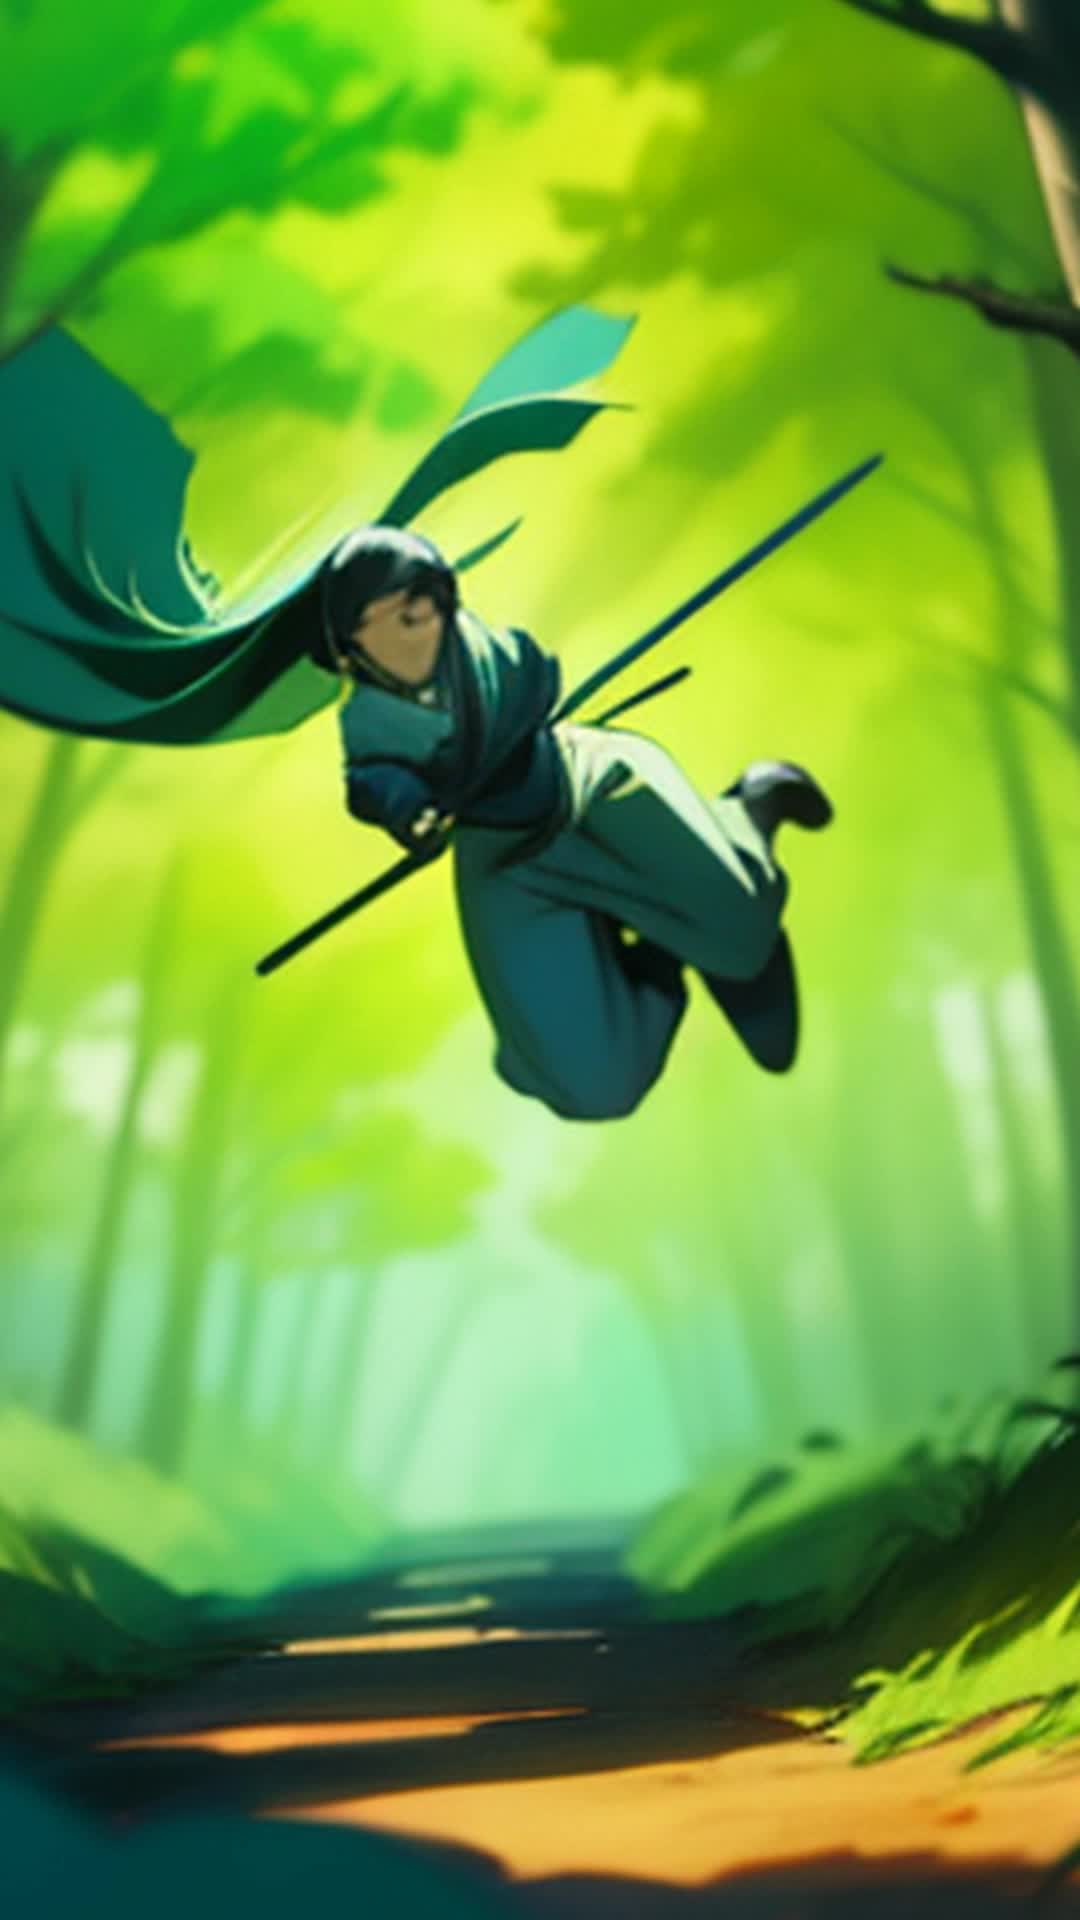 Ninja leaping through dense forest, evading arrows, mirroring pursuer's movements, uncanny precision, cinematic wide-angle, sharp focus, soft shadows, thrilling action sequence